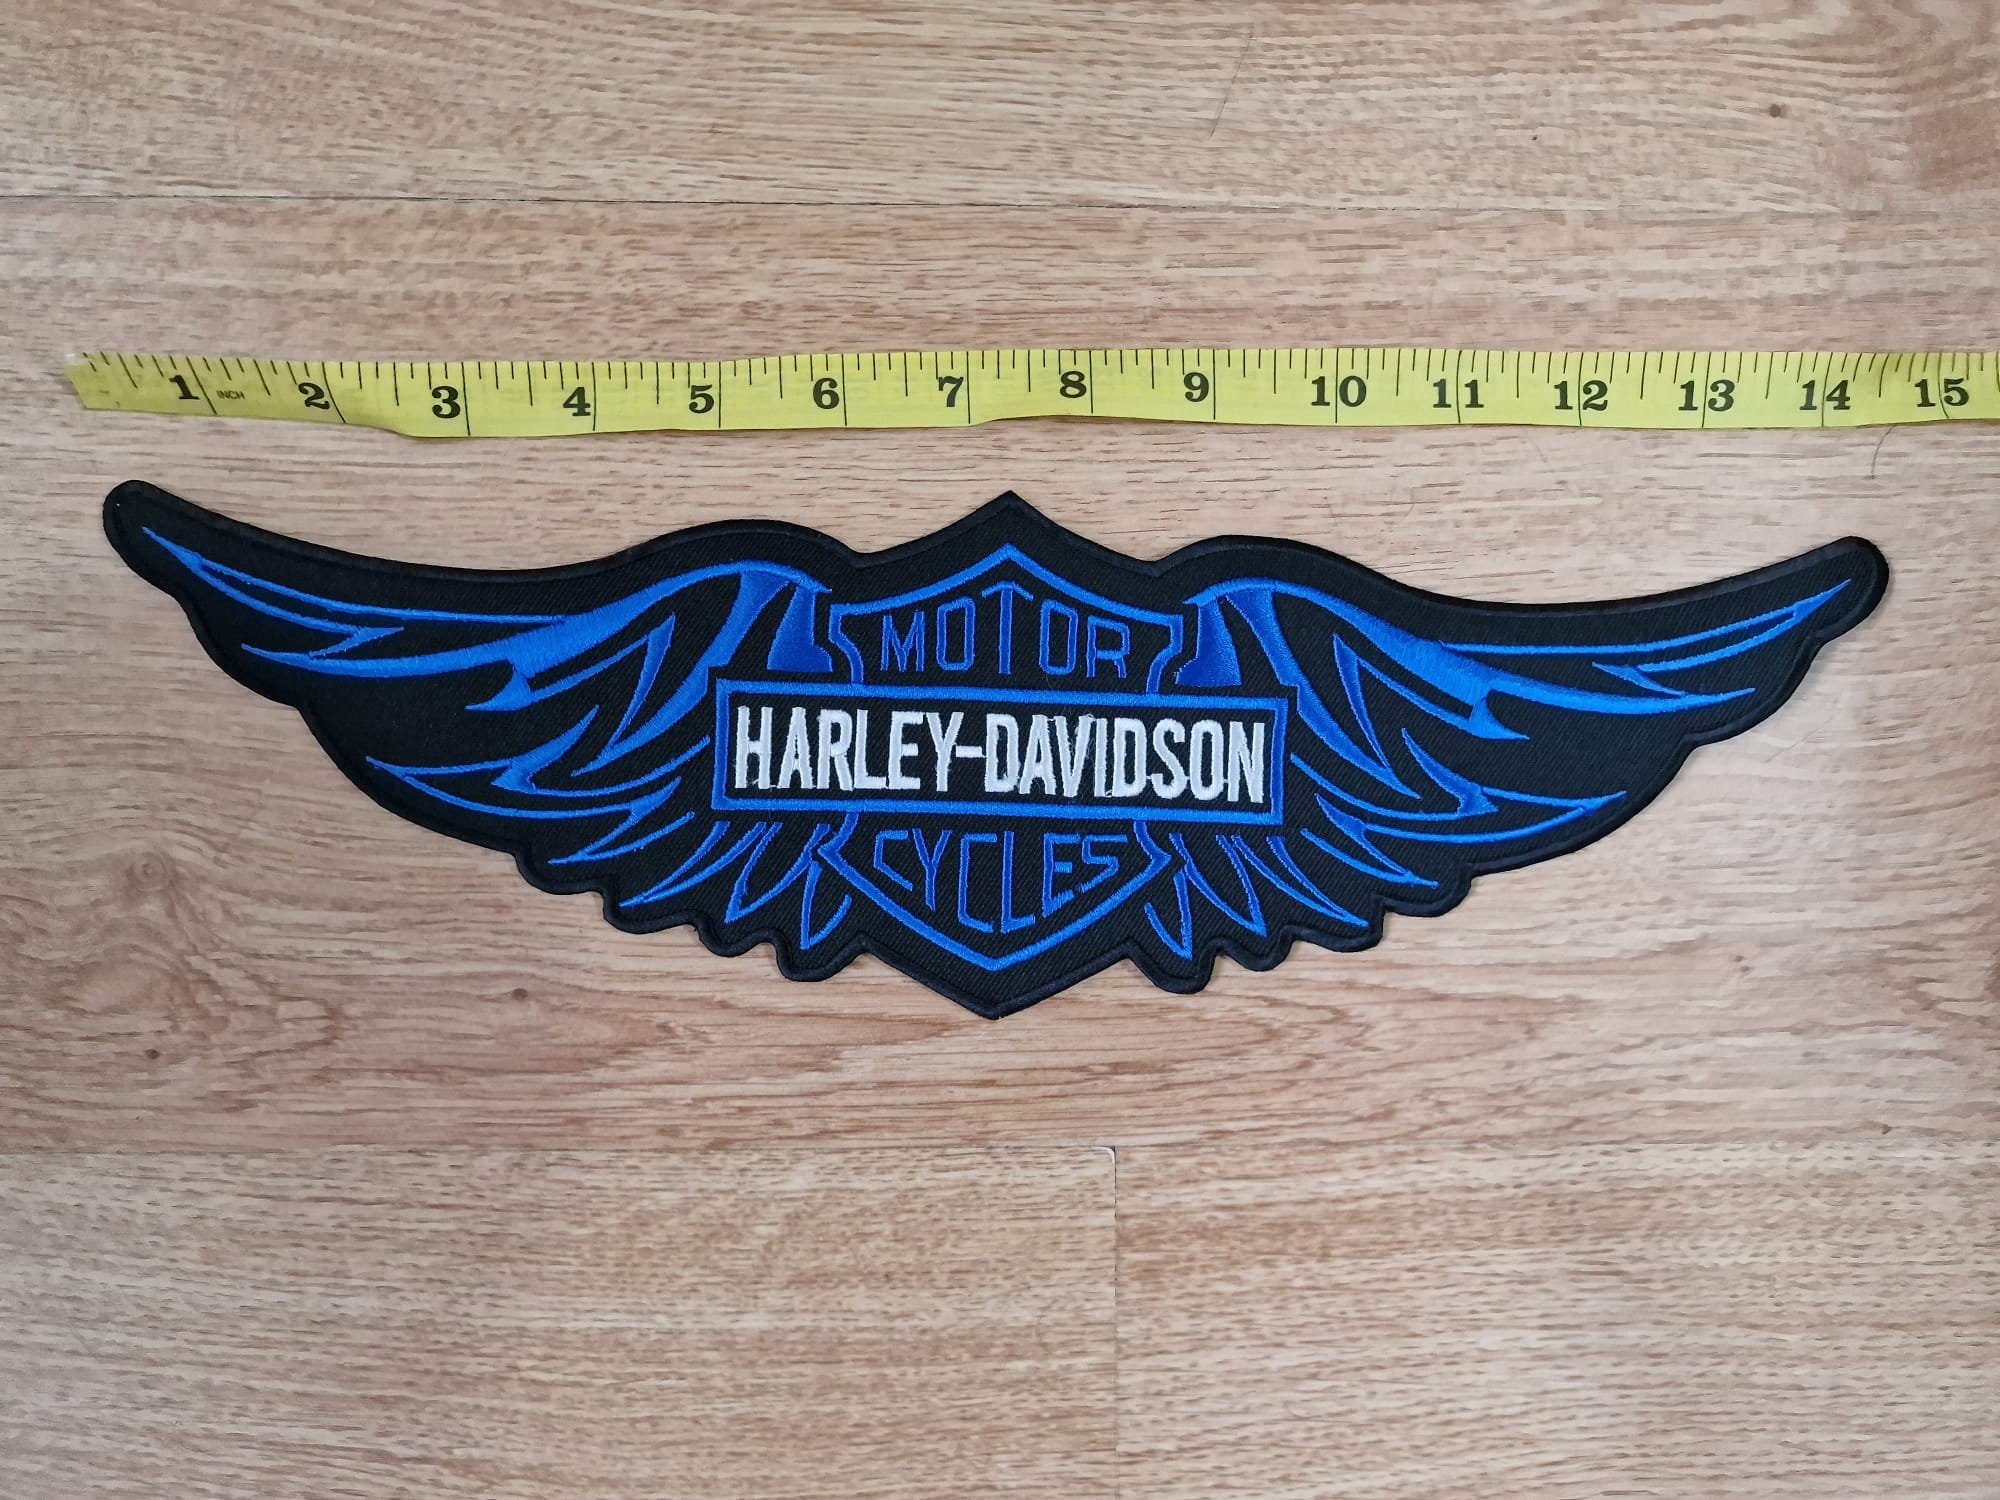 Harley Davidson Logo ( 2 Small) Embroidered Patch to Iron on